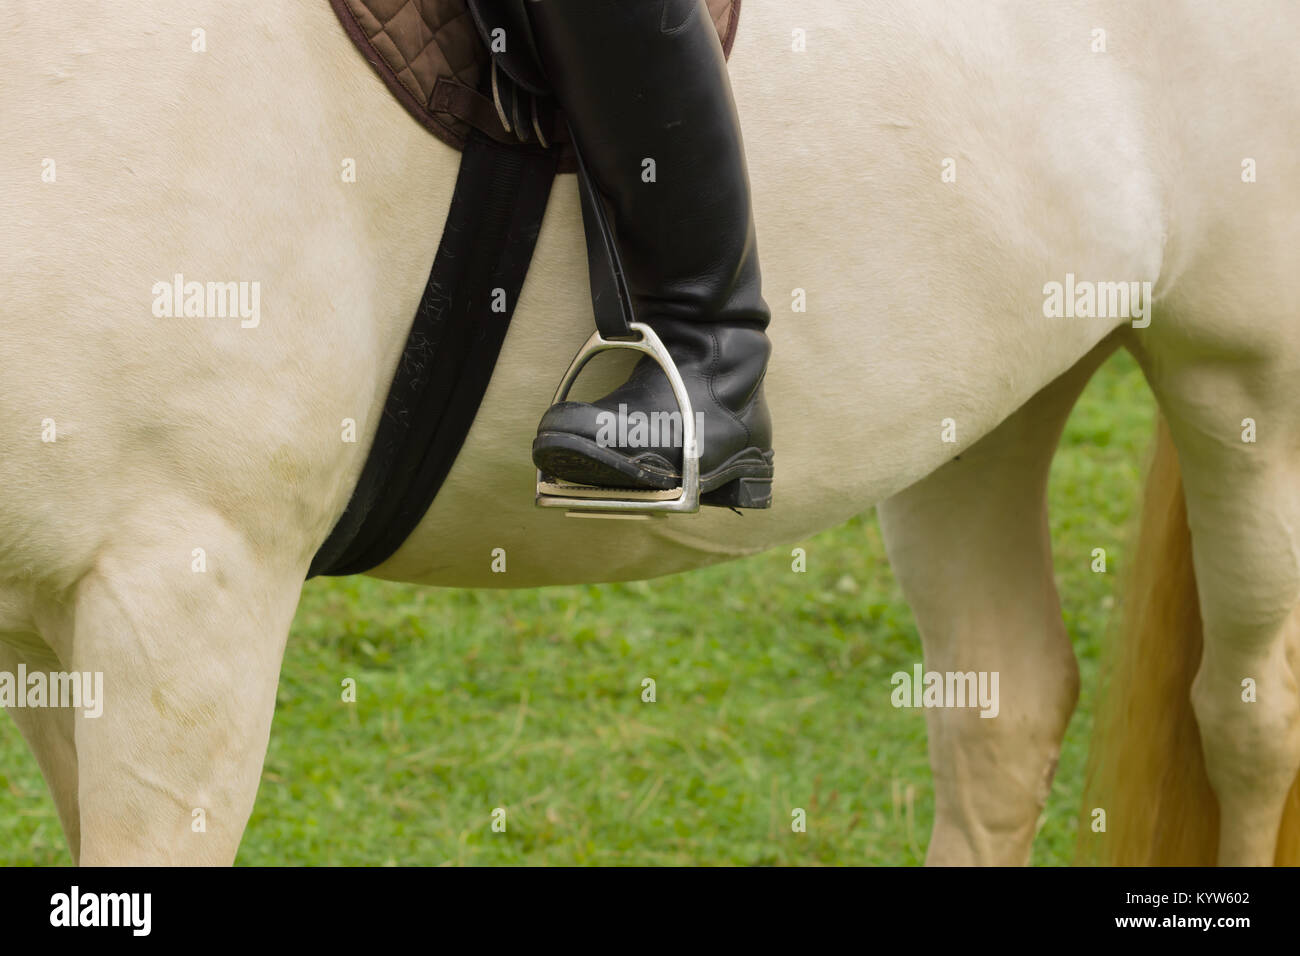 Close up of leather riding boots in stirrups on a cremello coloured thoroughbred horse Stock Photo